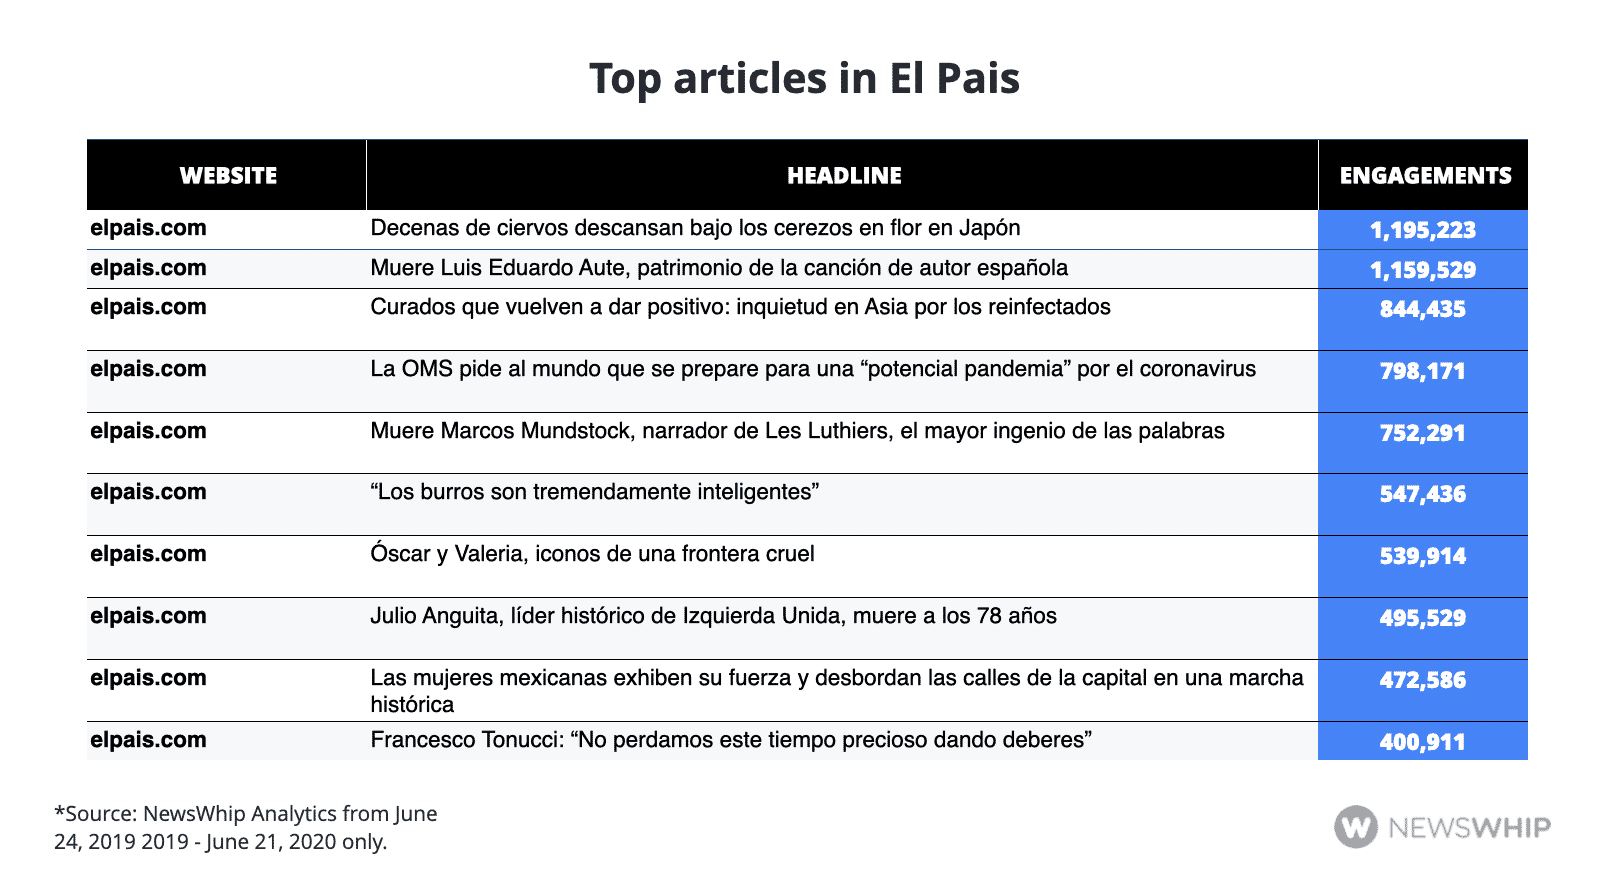 Table showing the top articles in El Pais, ranked by engagement